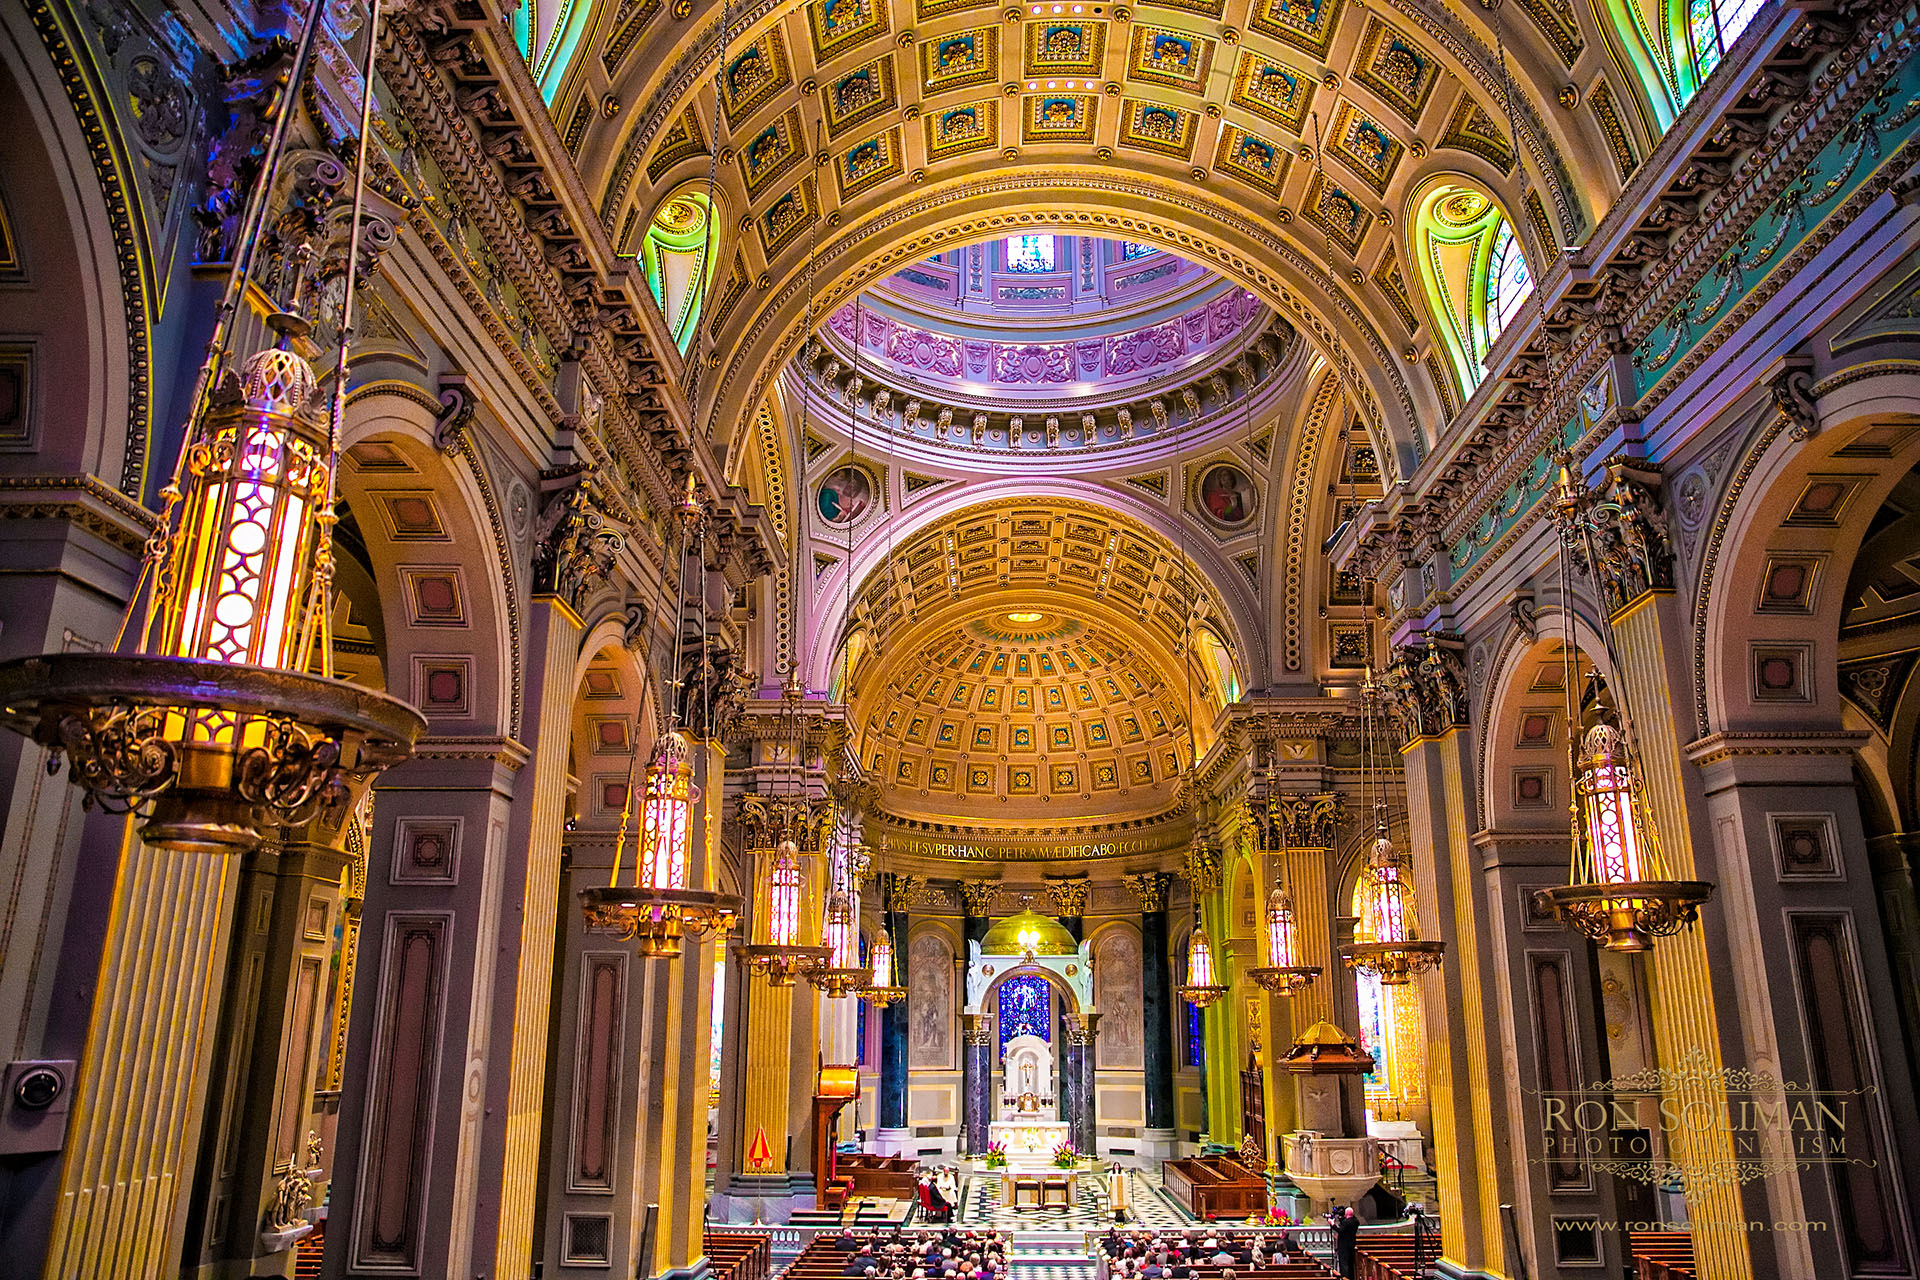 Cathedral Basilica of Saints Peter and Paul wedding